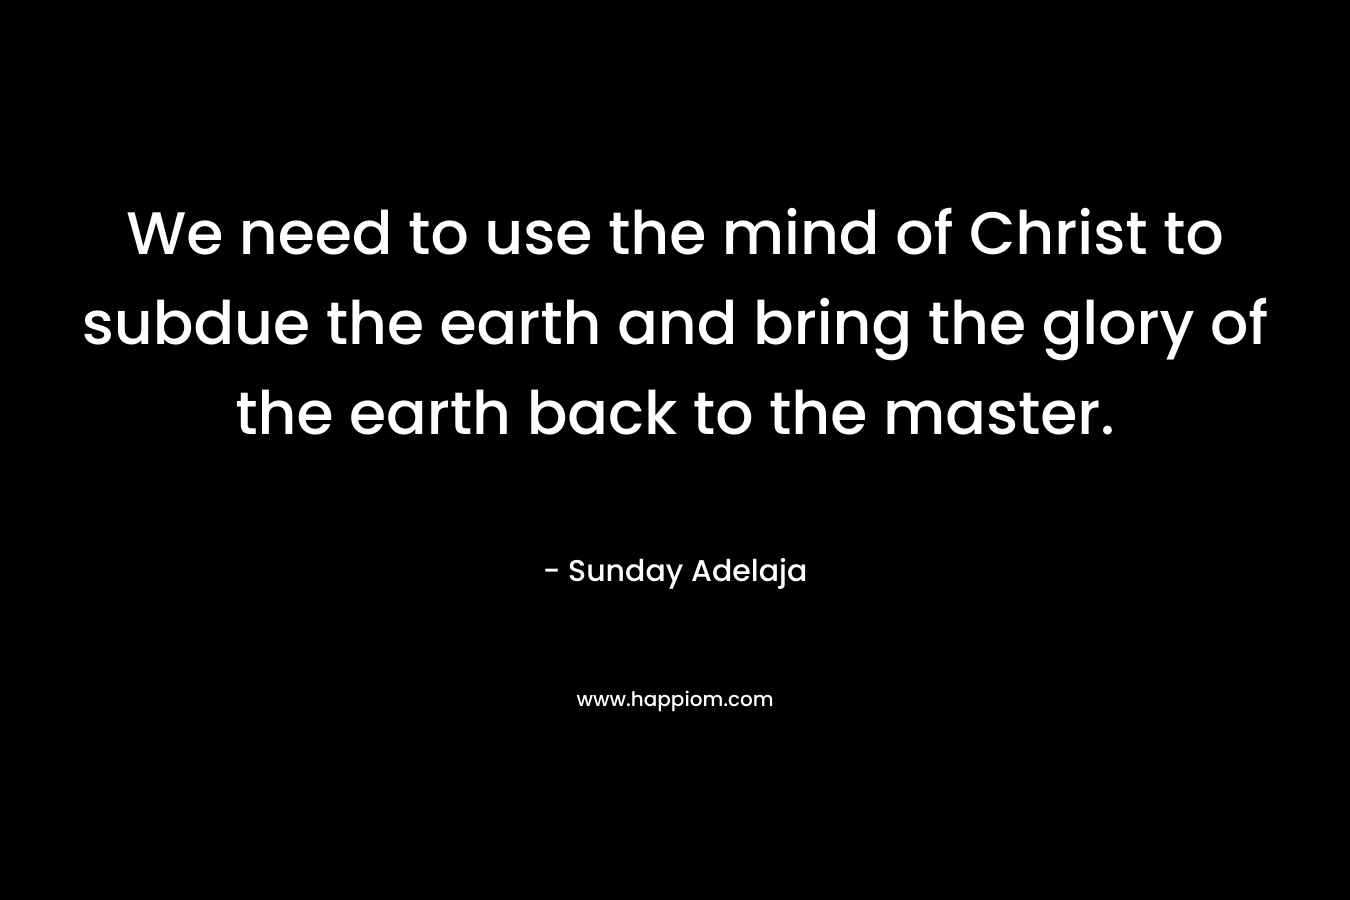 We need to use the mind of Christ to subdue the earth and bring the glory of the earth back to the master. – Sunday Adelaja